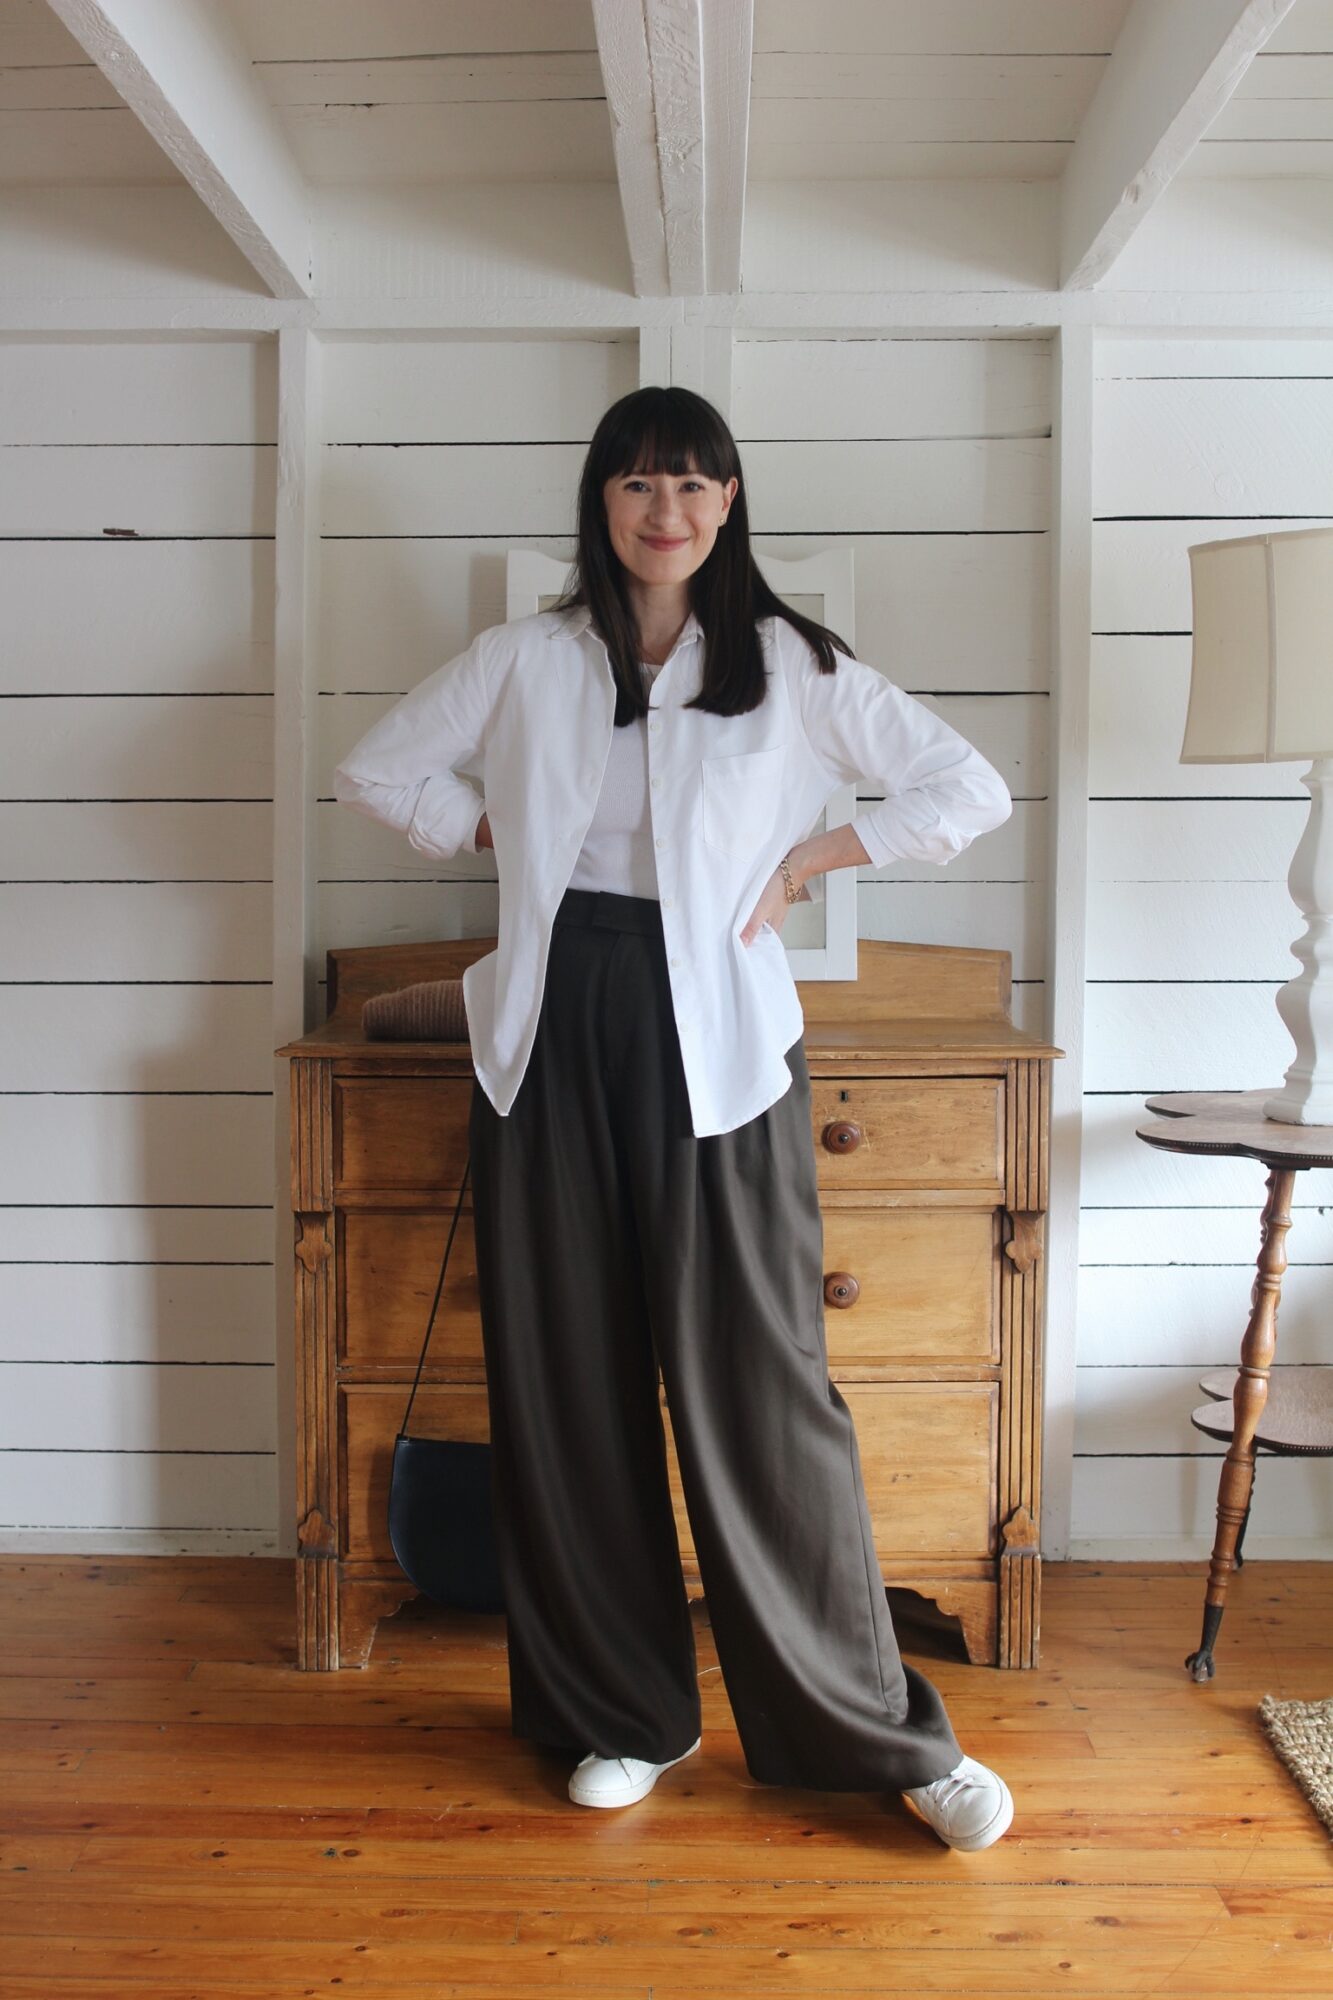 Wide Legged Pants With A Shirt And Overcoat_Autumn styling for curvy women